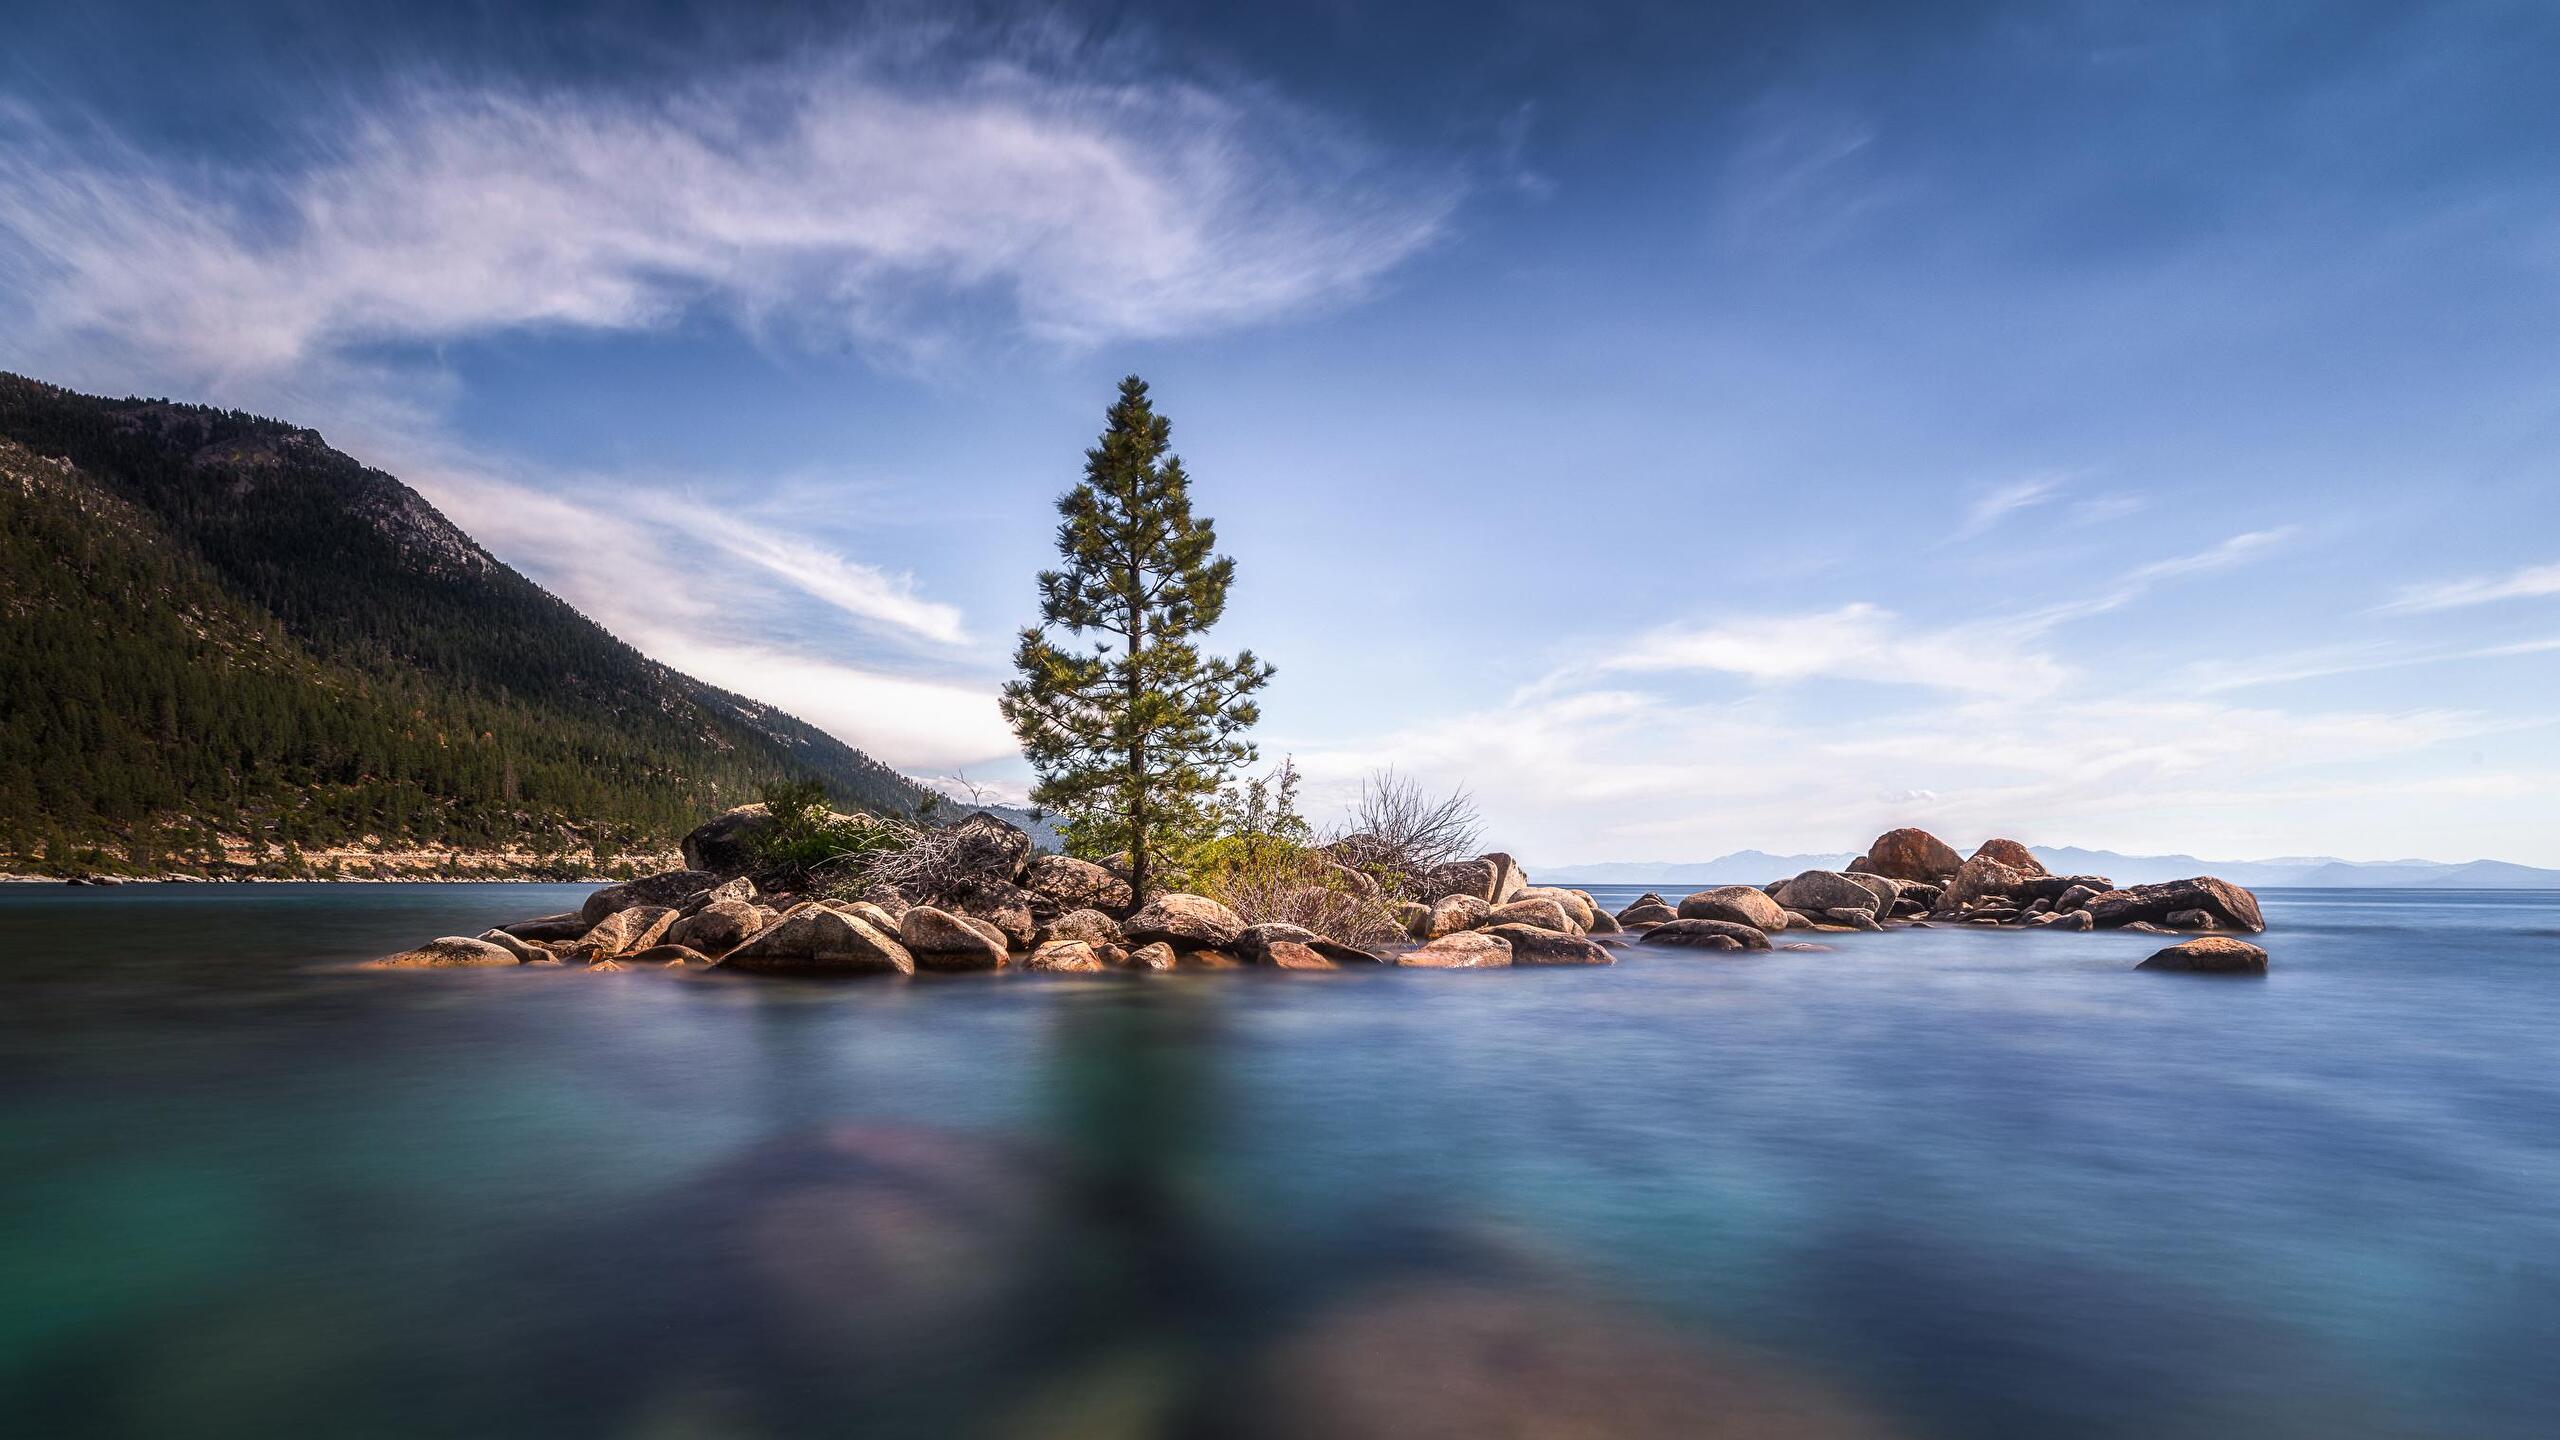 Tahoe 4K wallpaper for your desktop or mobile screen free and easy to download